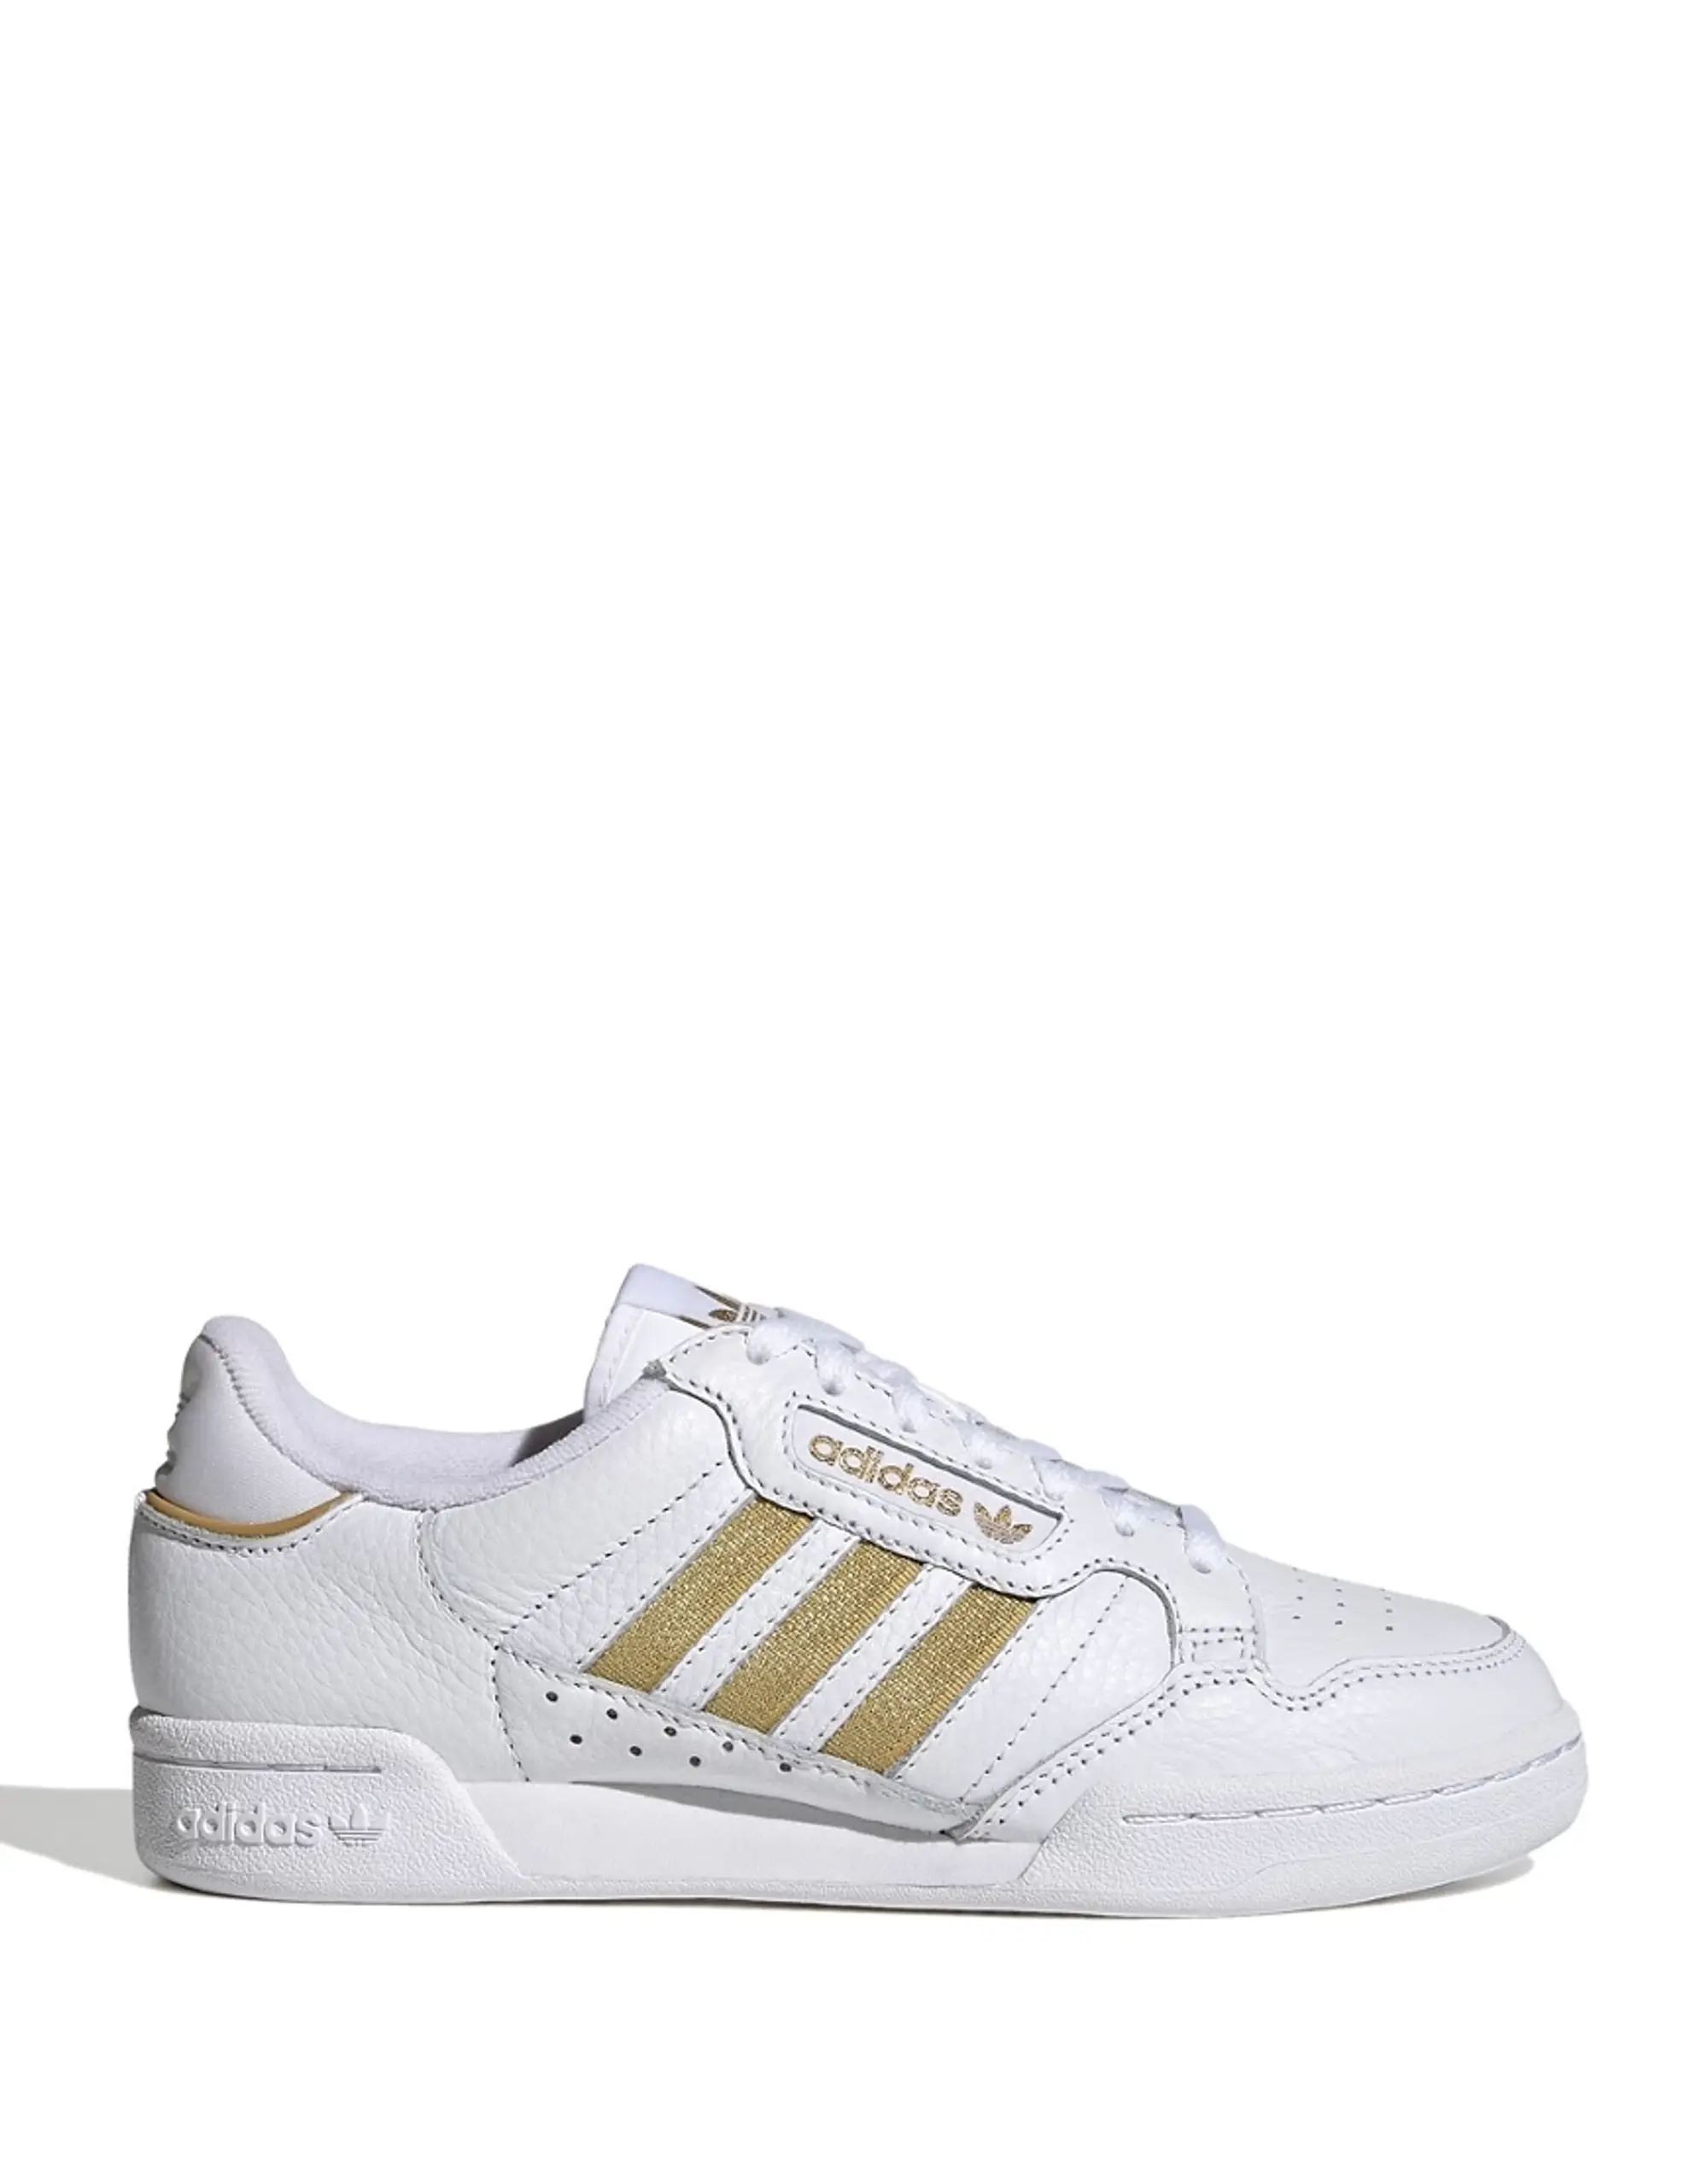 Adidas Originals Continental 80 Stripes Trainers In White And Gold